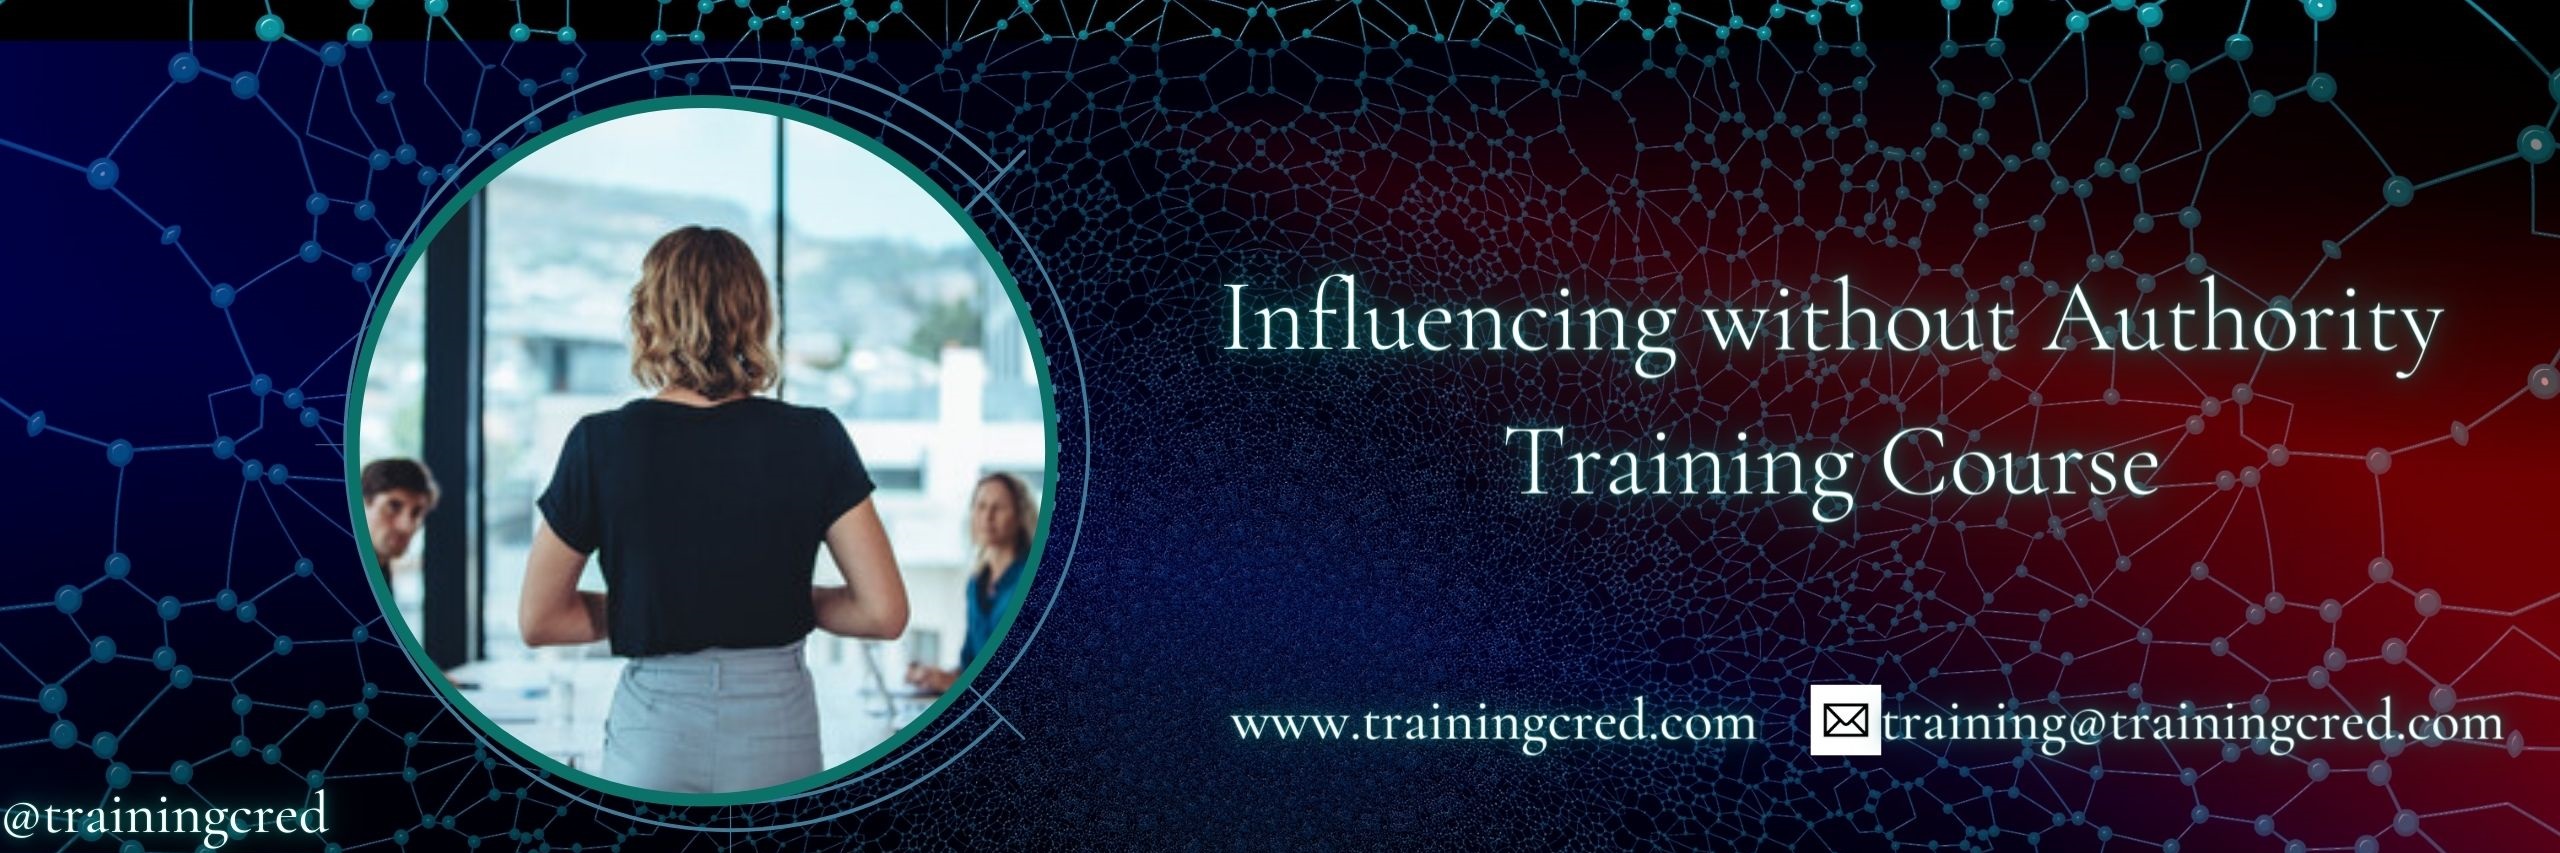 Influencing without Authority Training